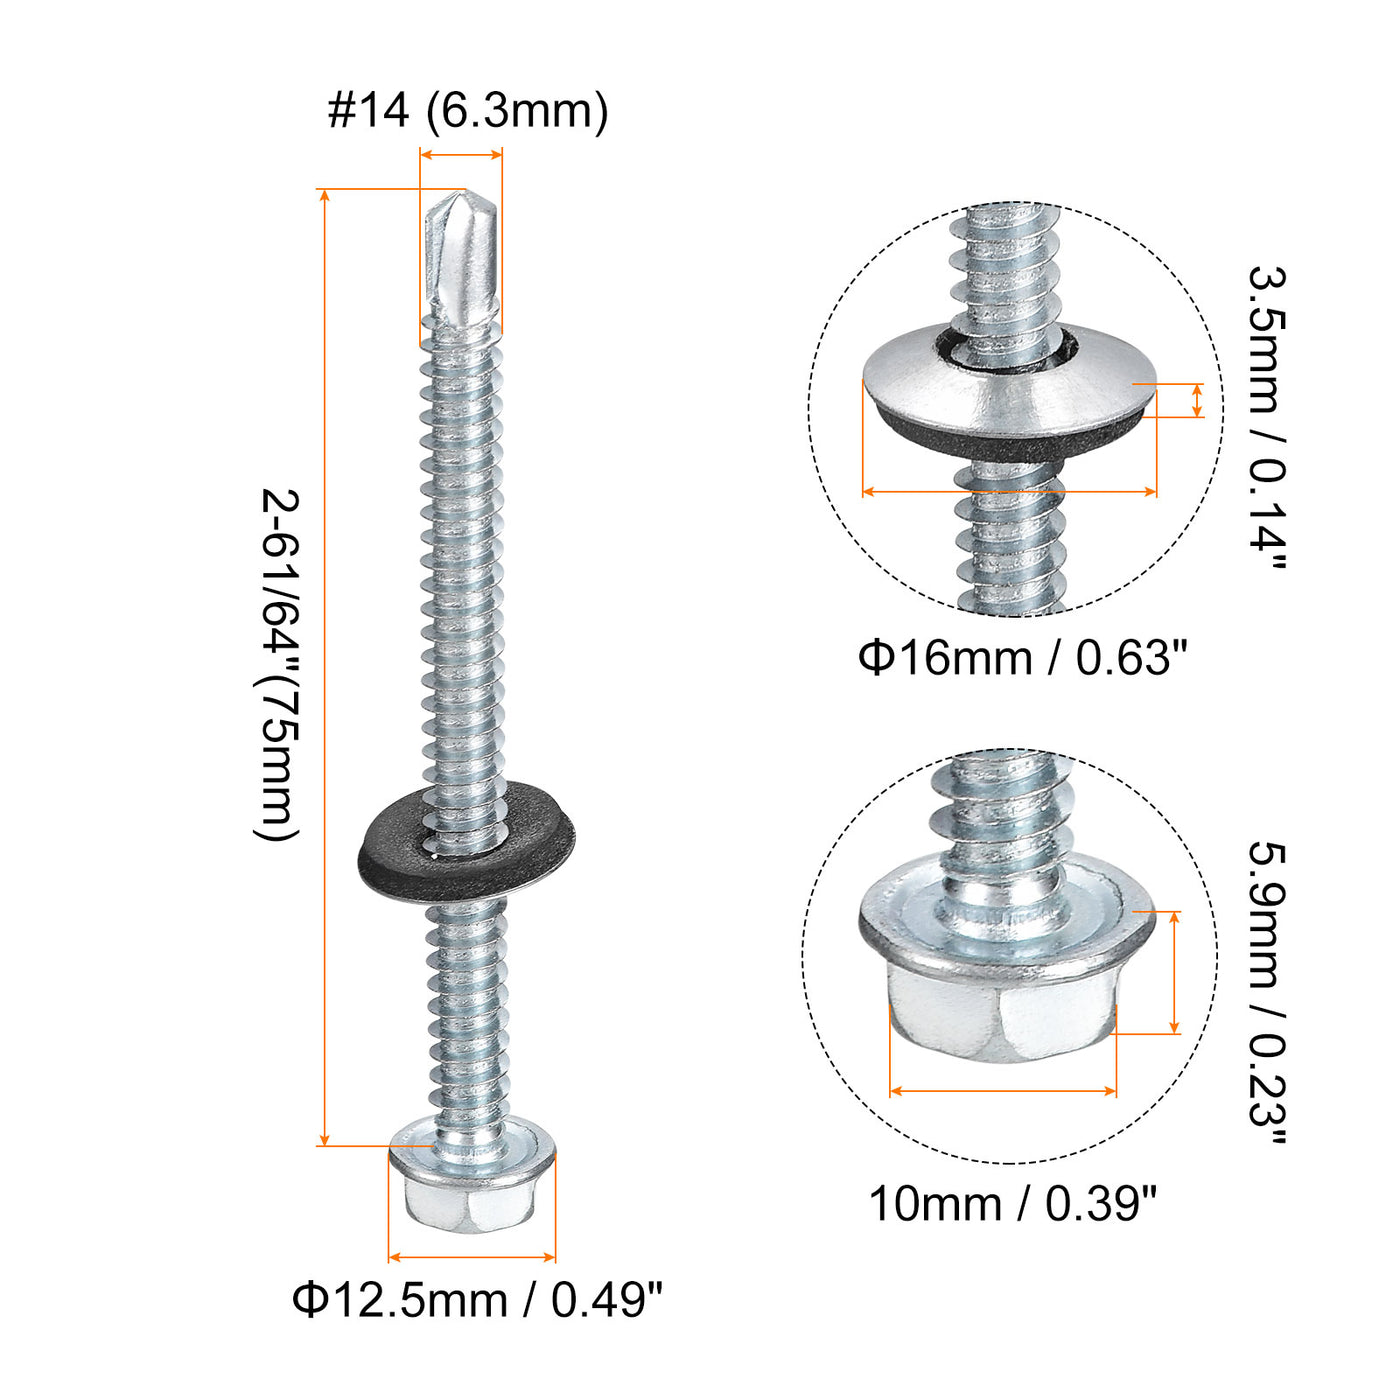 uxcell Uxcell #14 x 2-61/64" Self Drilling Screws, 50pcs Roofing Screws with EPDM Washer